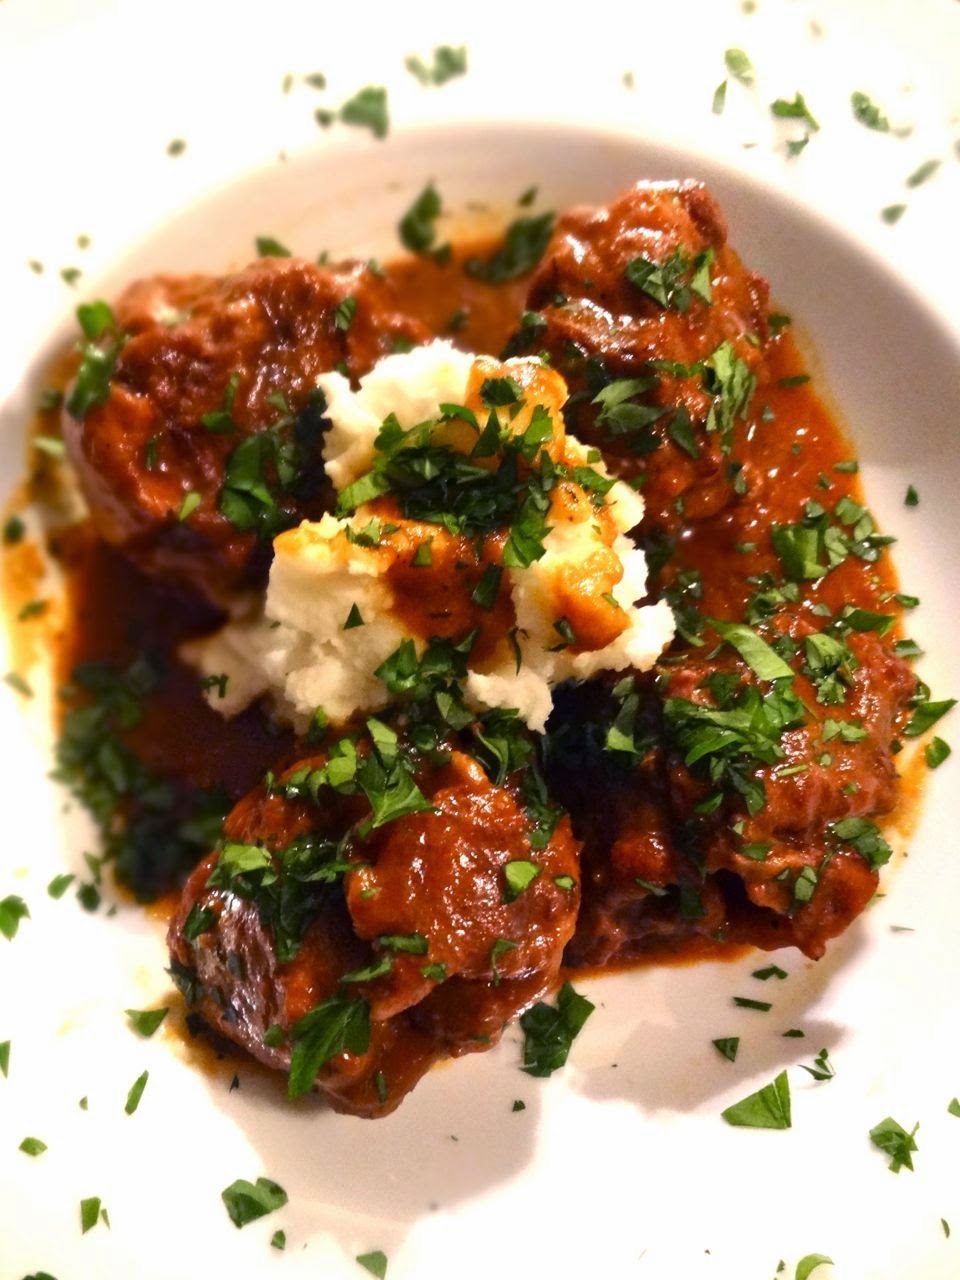 Scrumpdillyicious: Braised Oxtail Stew with Red Wine